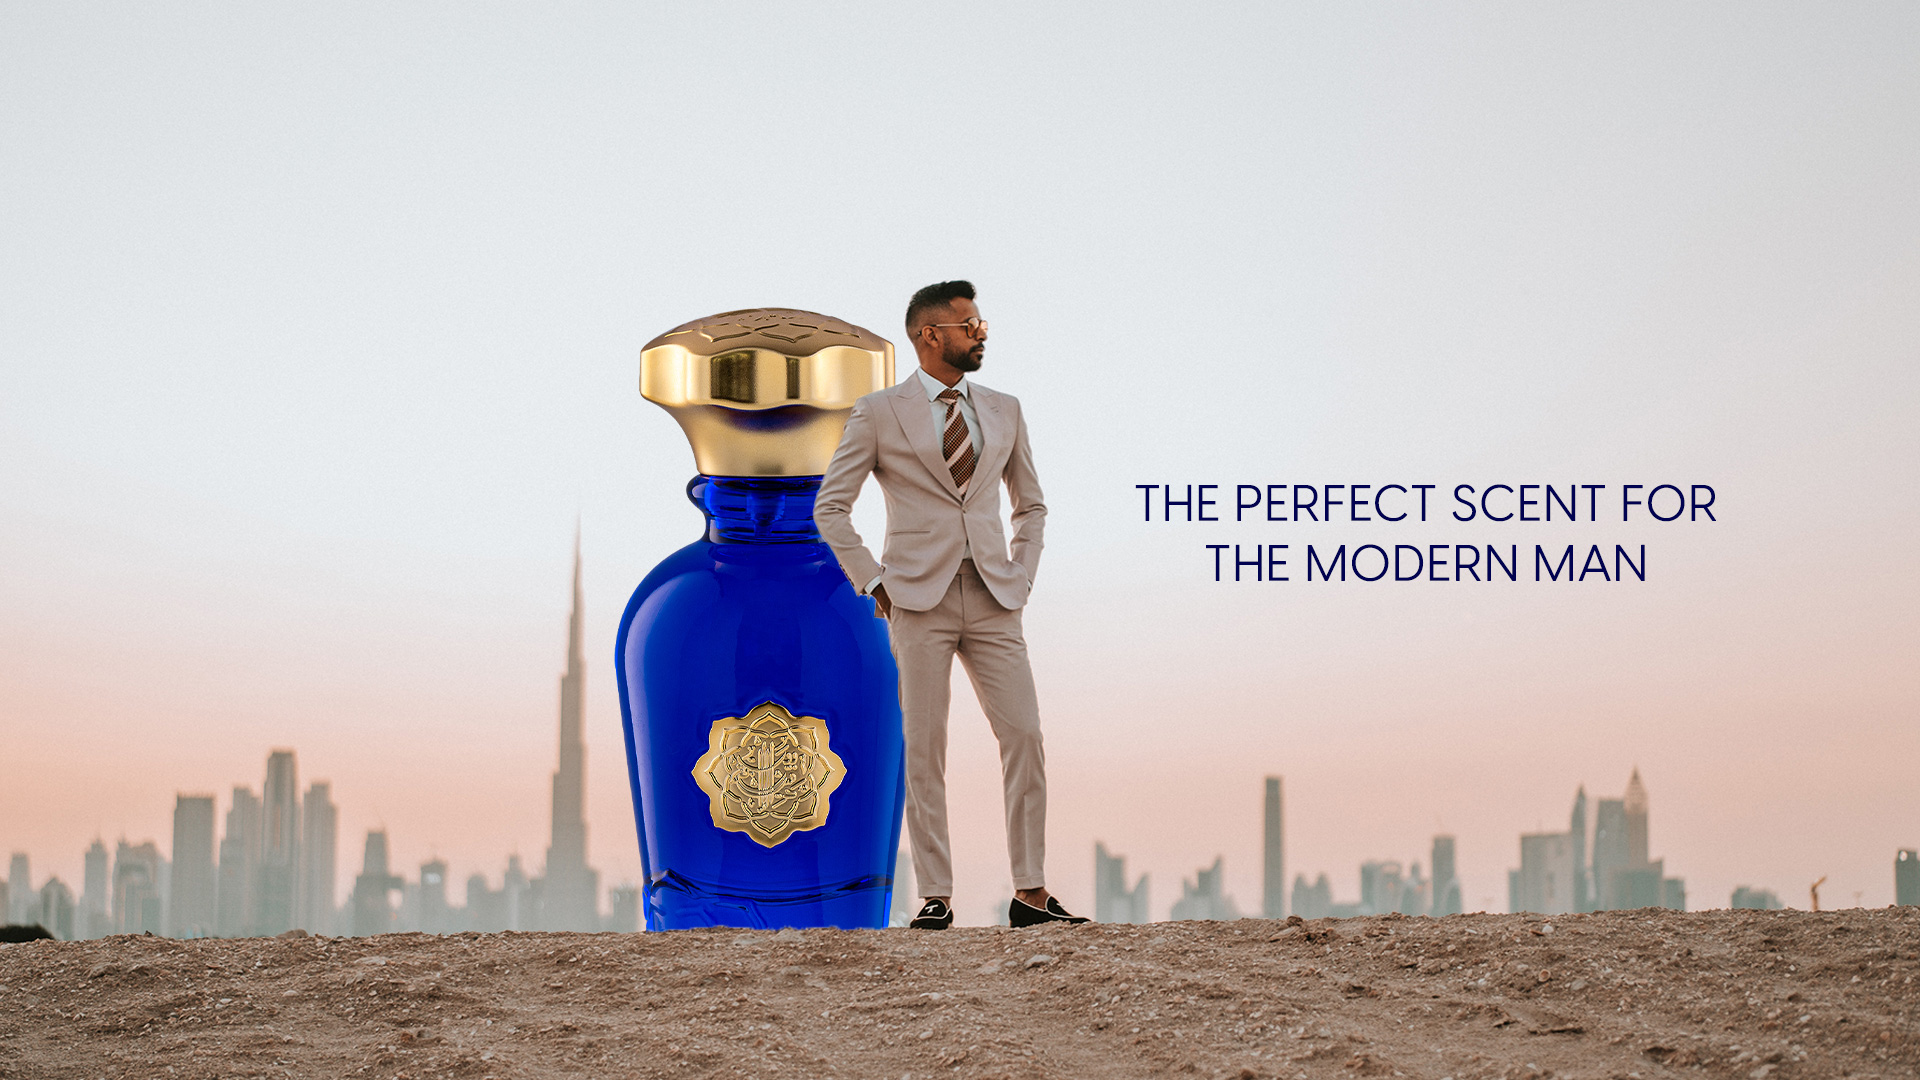 The Perfect Scent for the Modern Man: Shop Best Mens Perfume at Affordable Cost